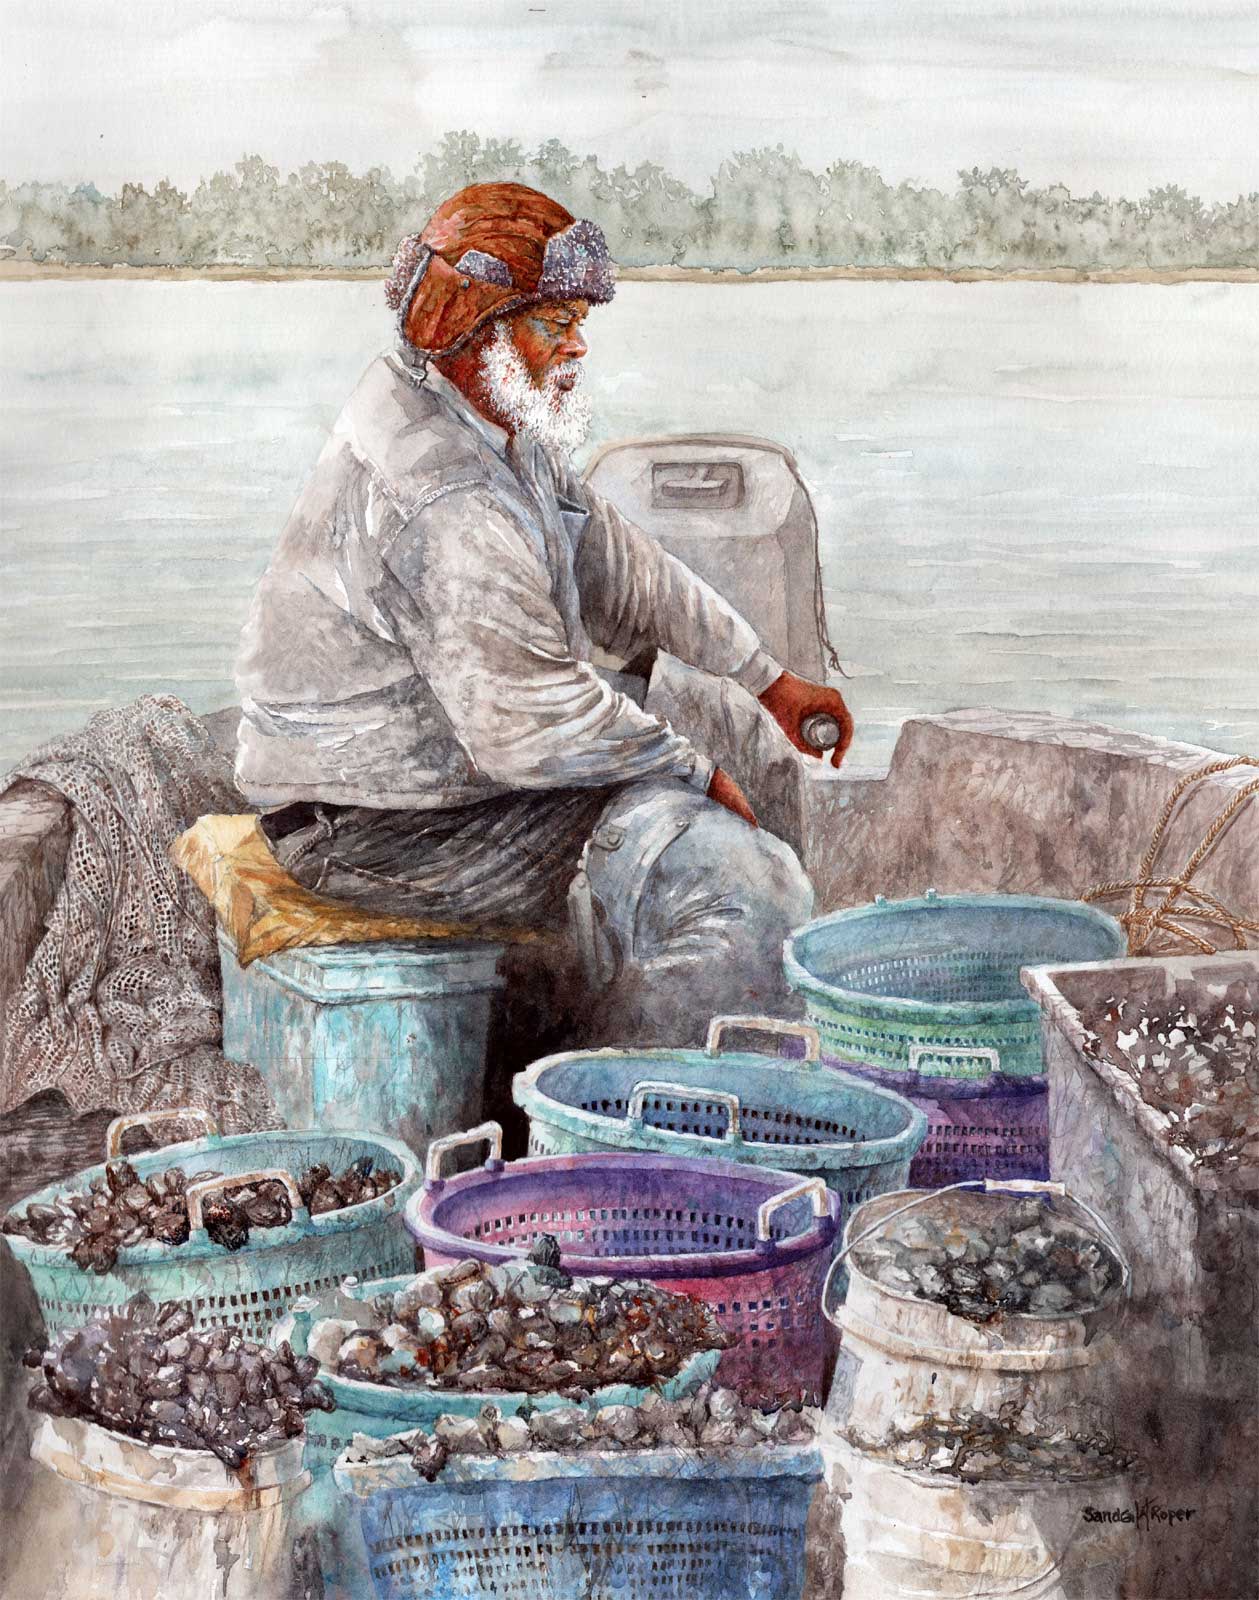 Sandra Roper, Catch of the Day, 16x20 Watercolor, $1350